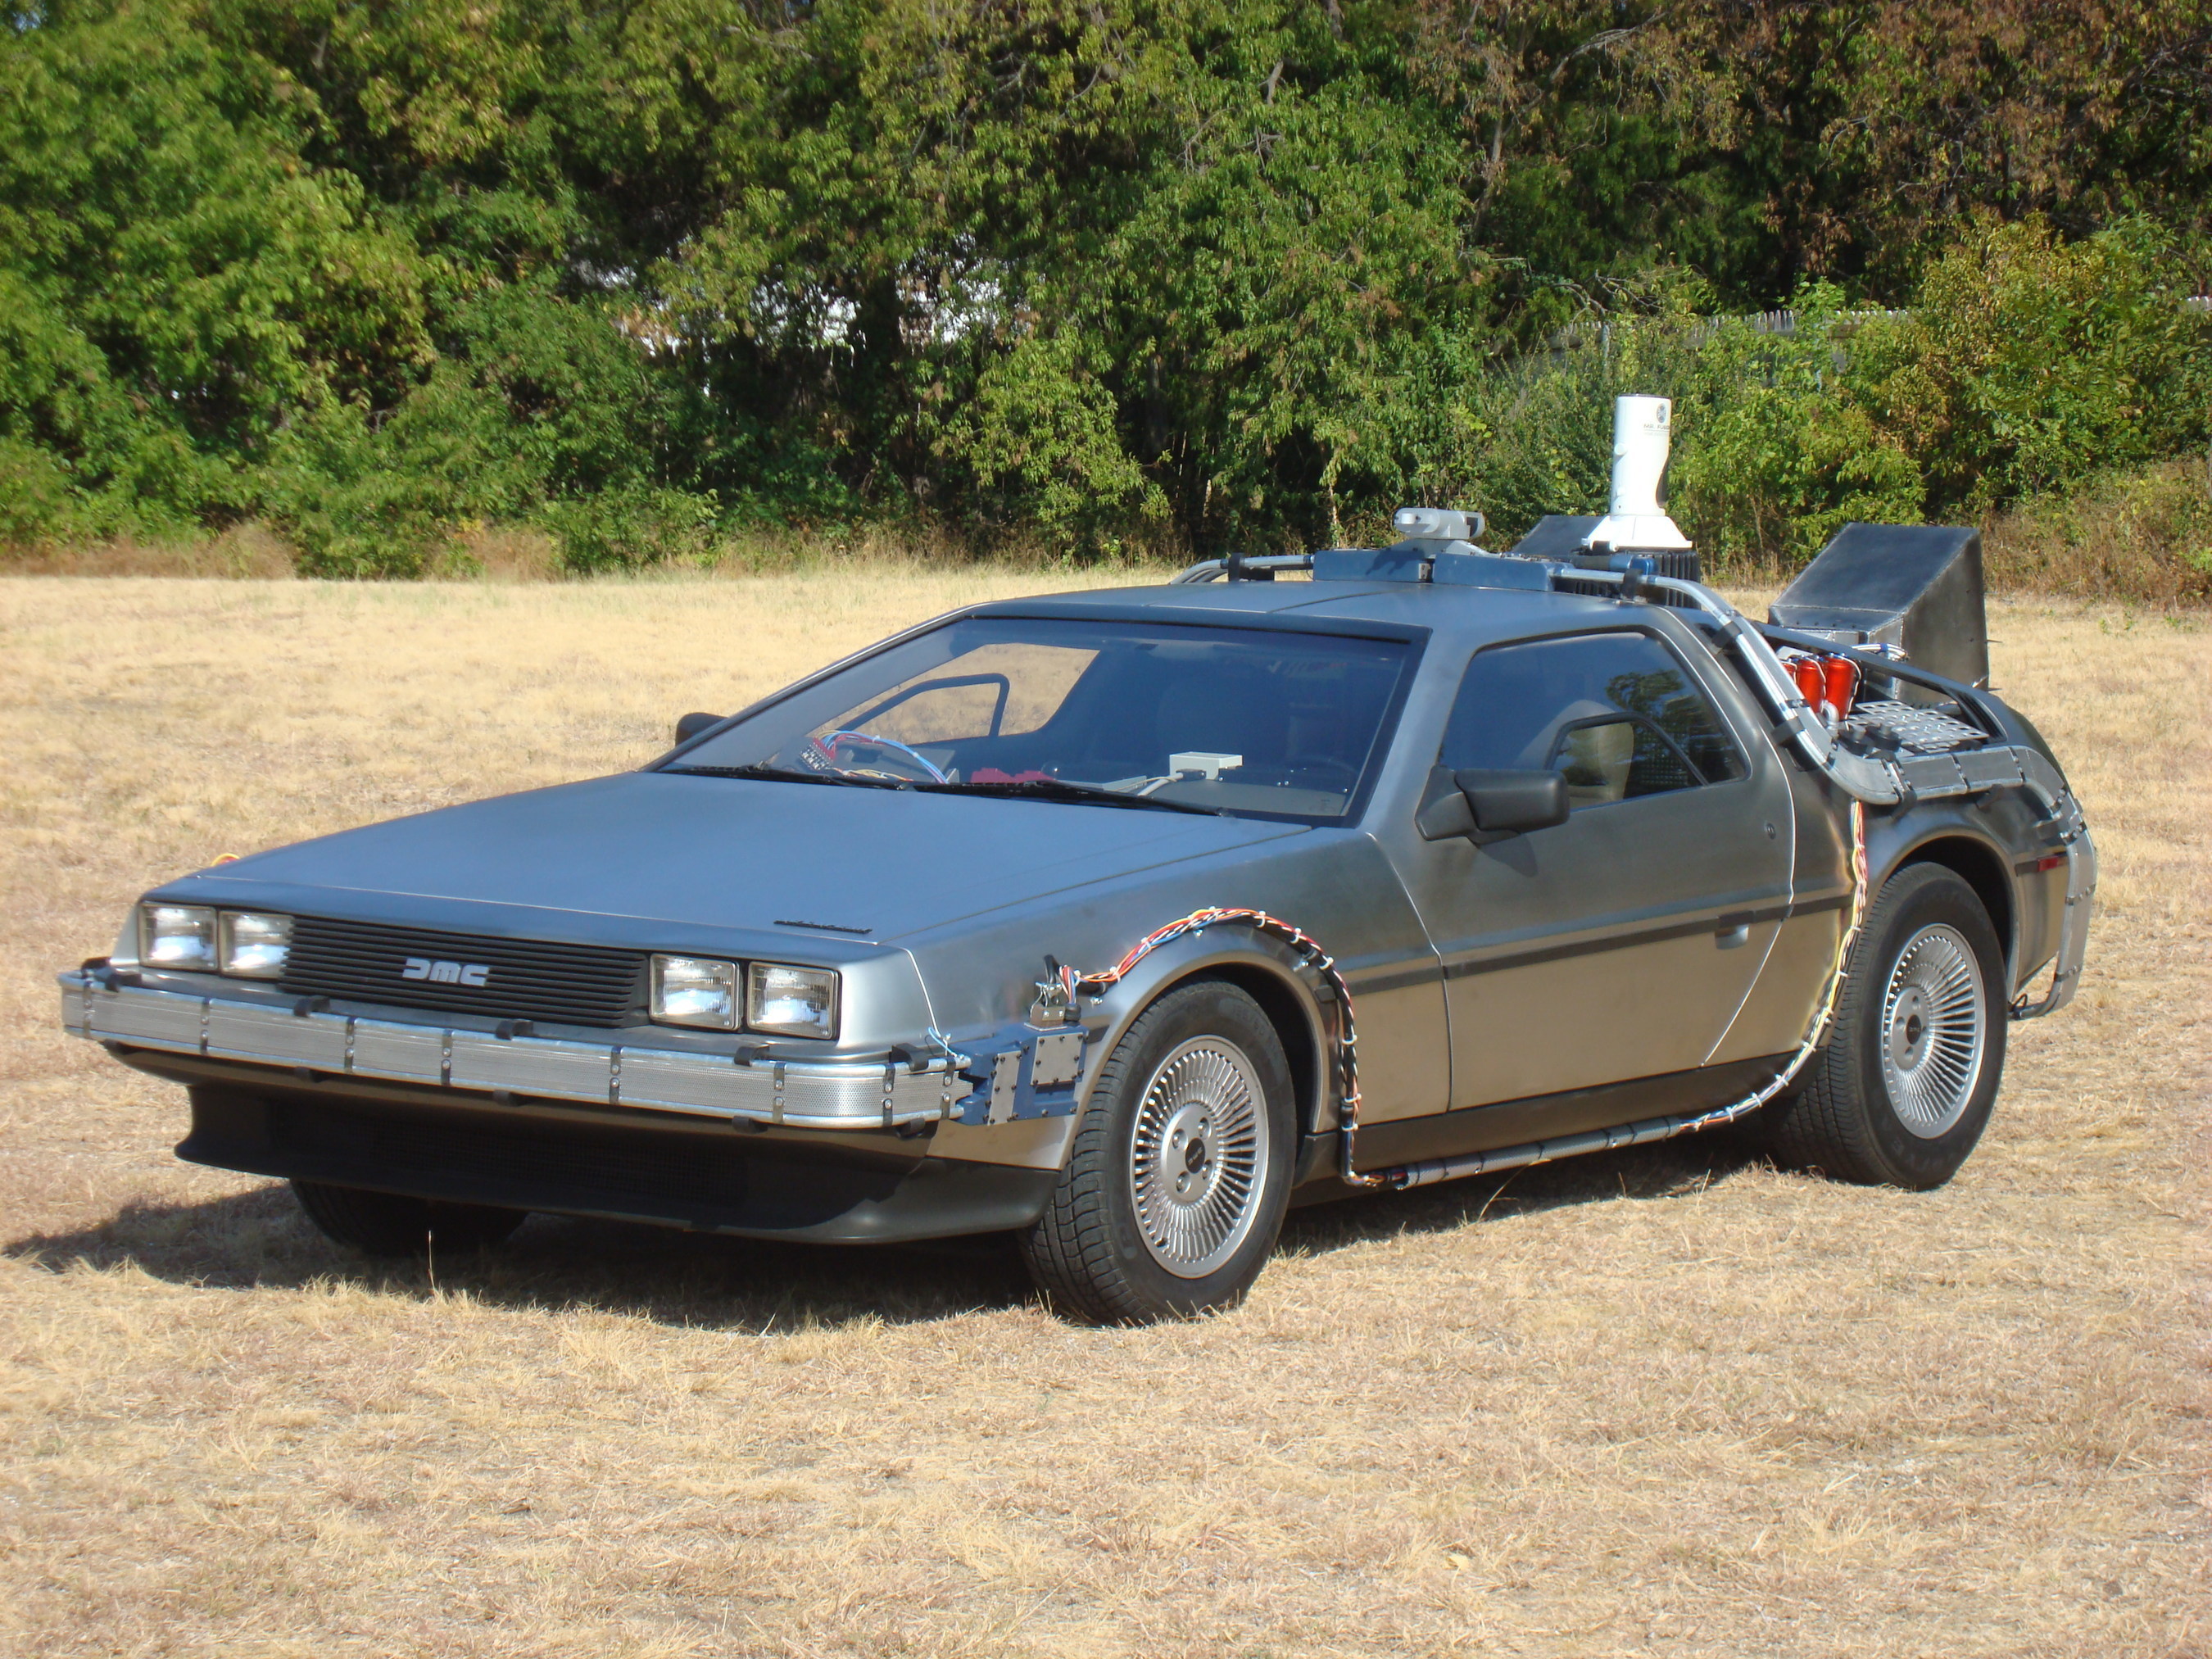 Maryland Live Casino Celebrates 30th Anniversary of "Back to the Future" with DeLorean Time Machine Giveaway in July